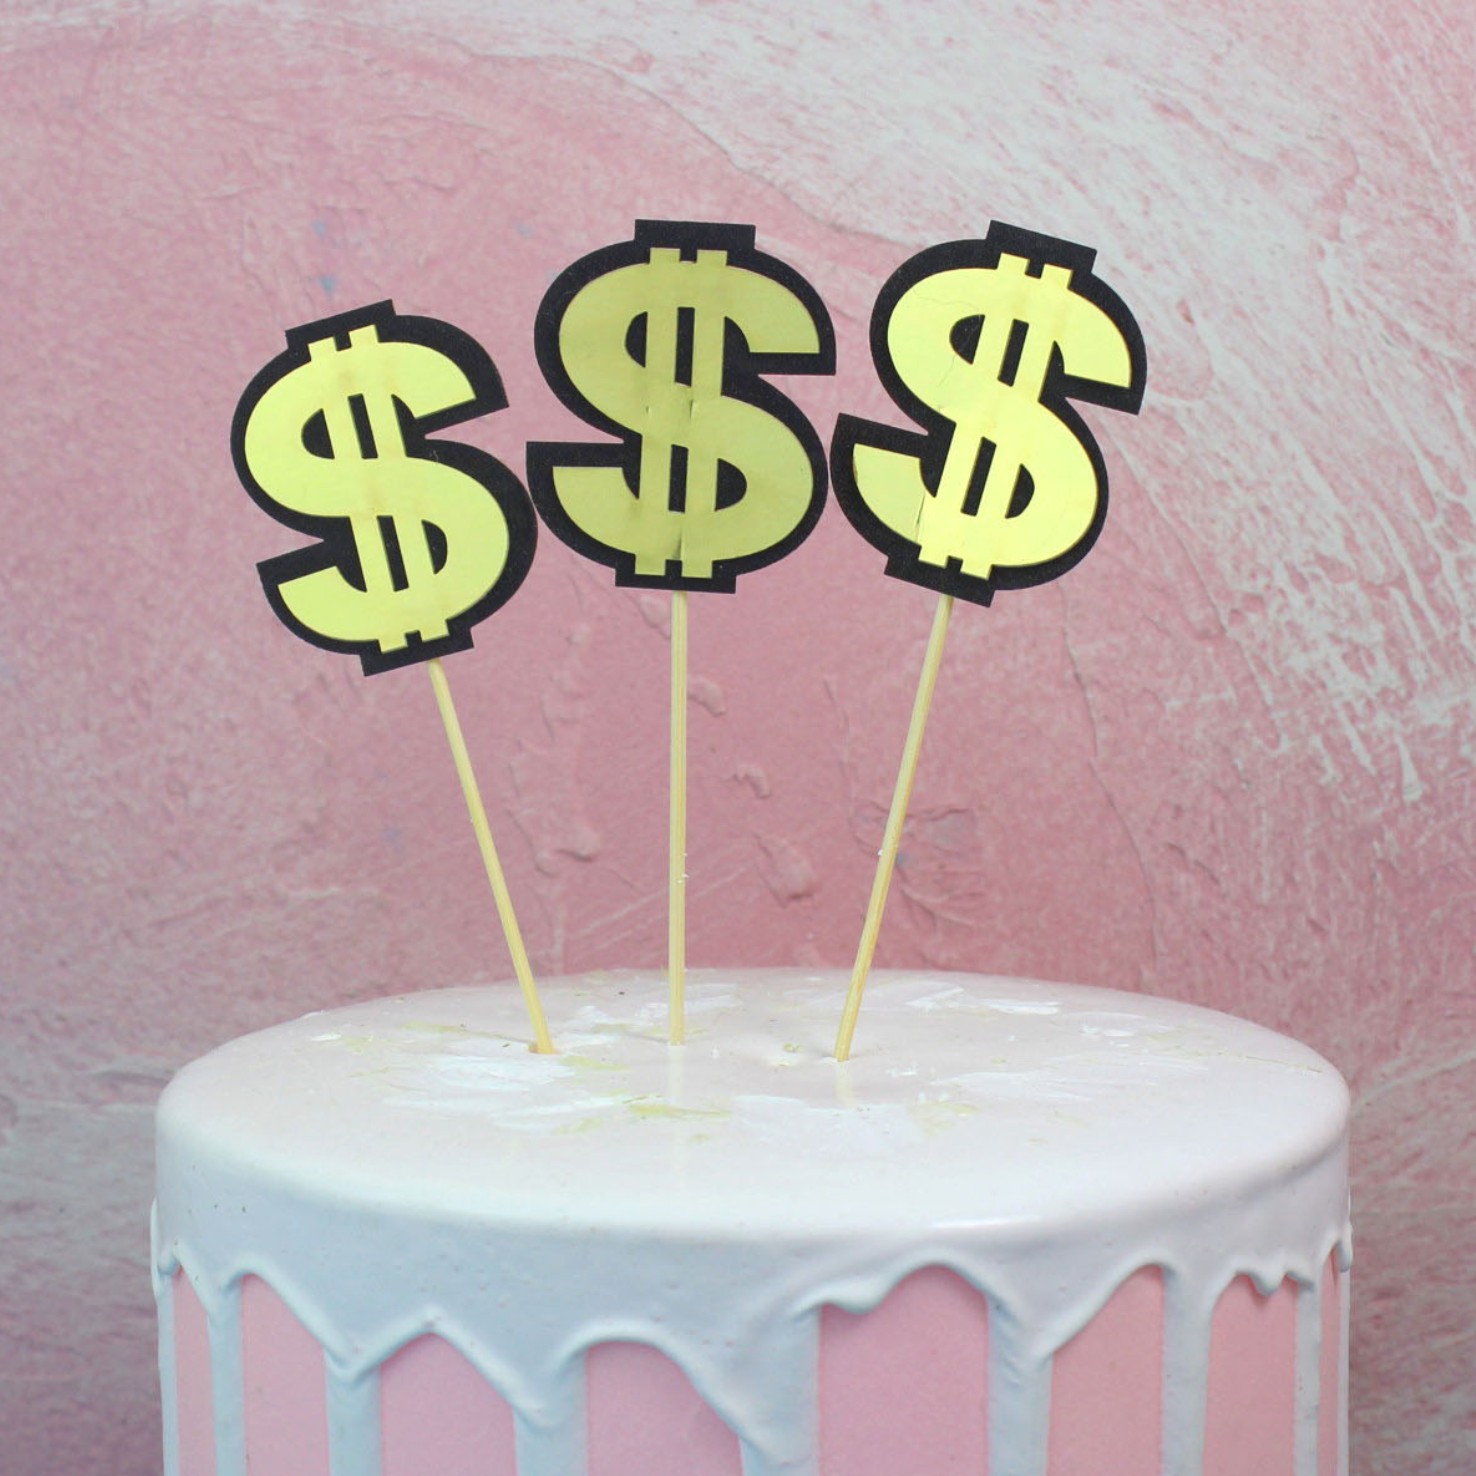 Gucci Bag of Money - Decorated Cake by Duzant - CakesDecor